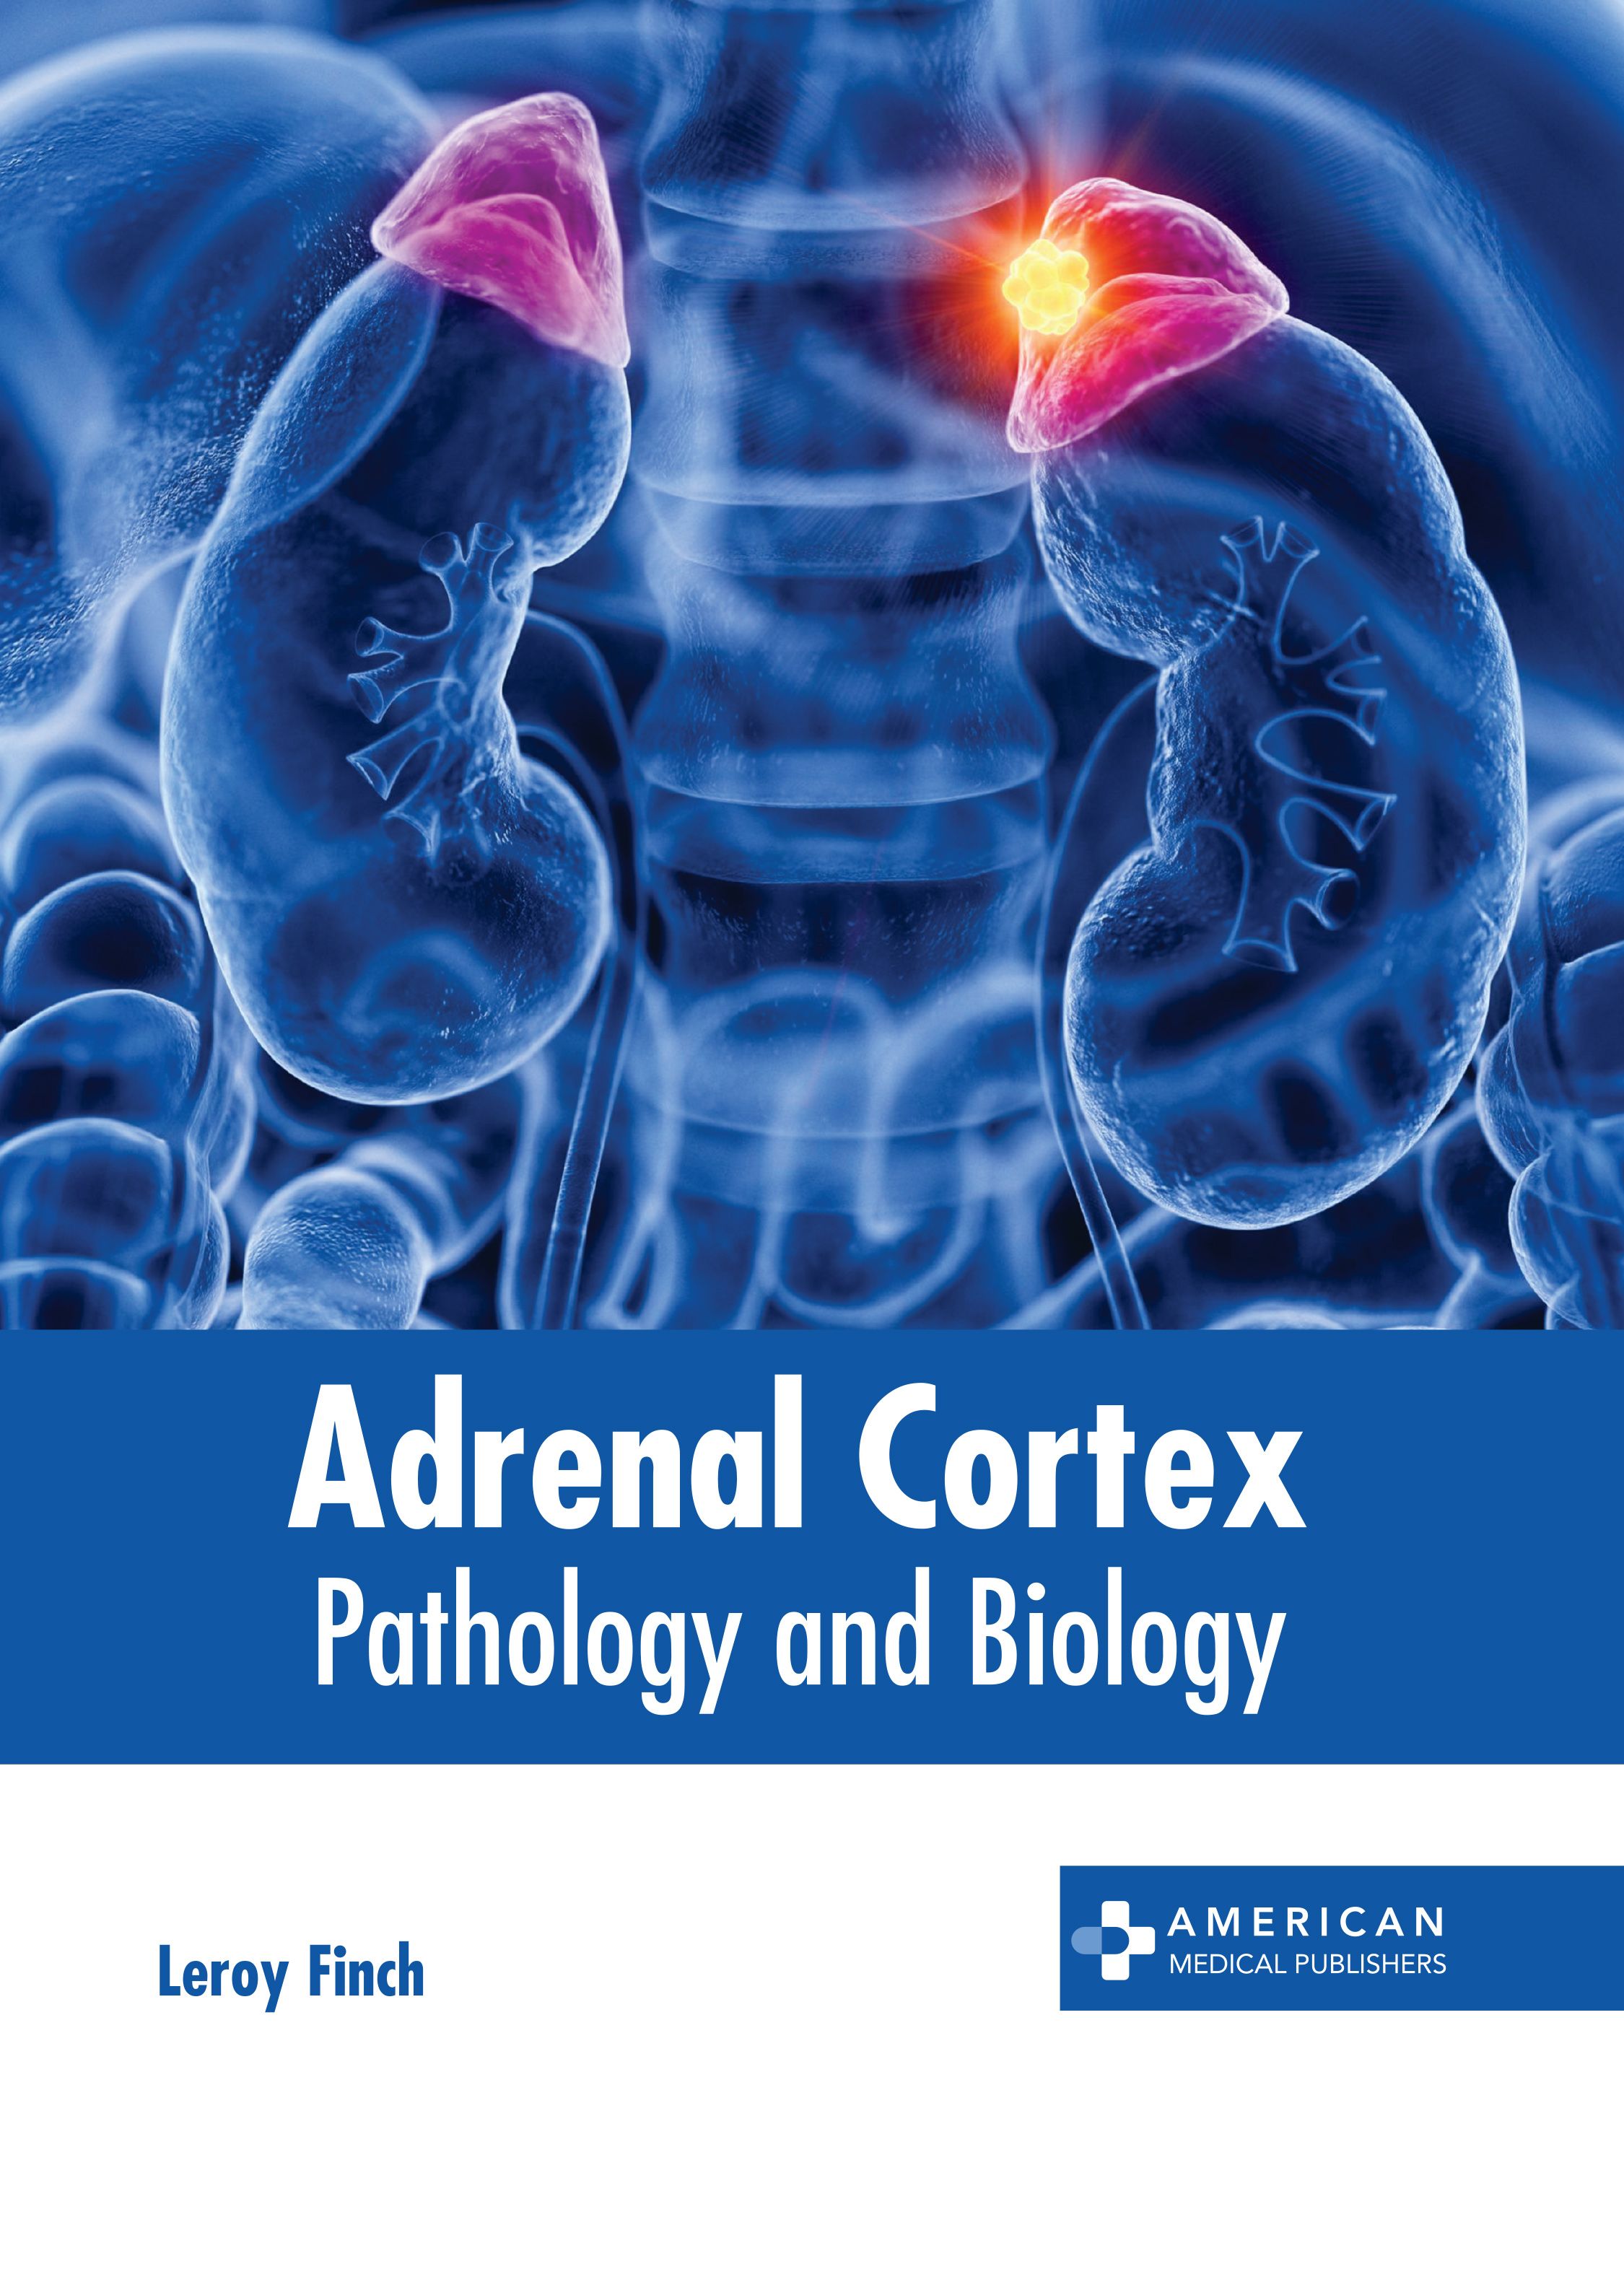 

exclusive-publishers/american-medical-publishers/adrenal-cortex-pathology-and-biology-9781639278534